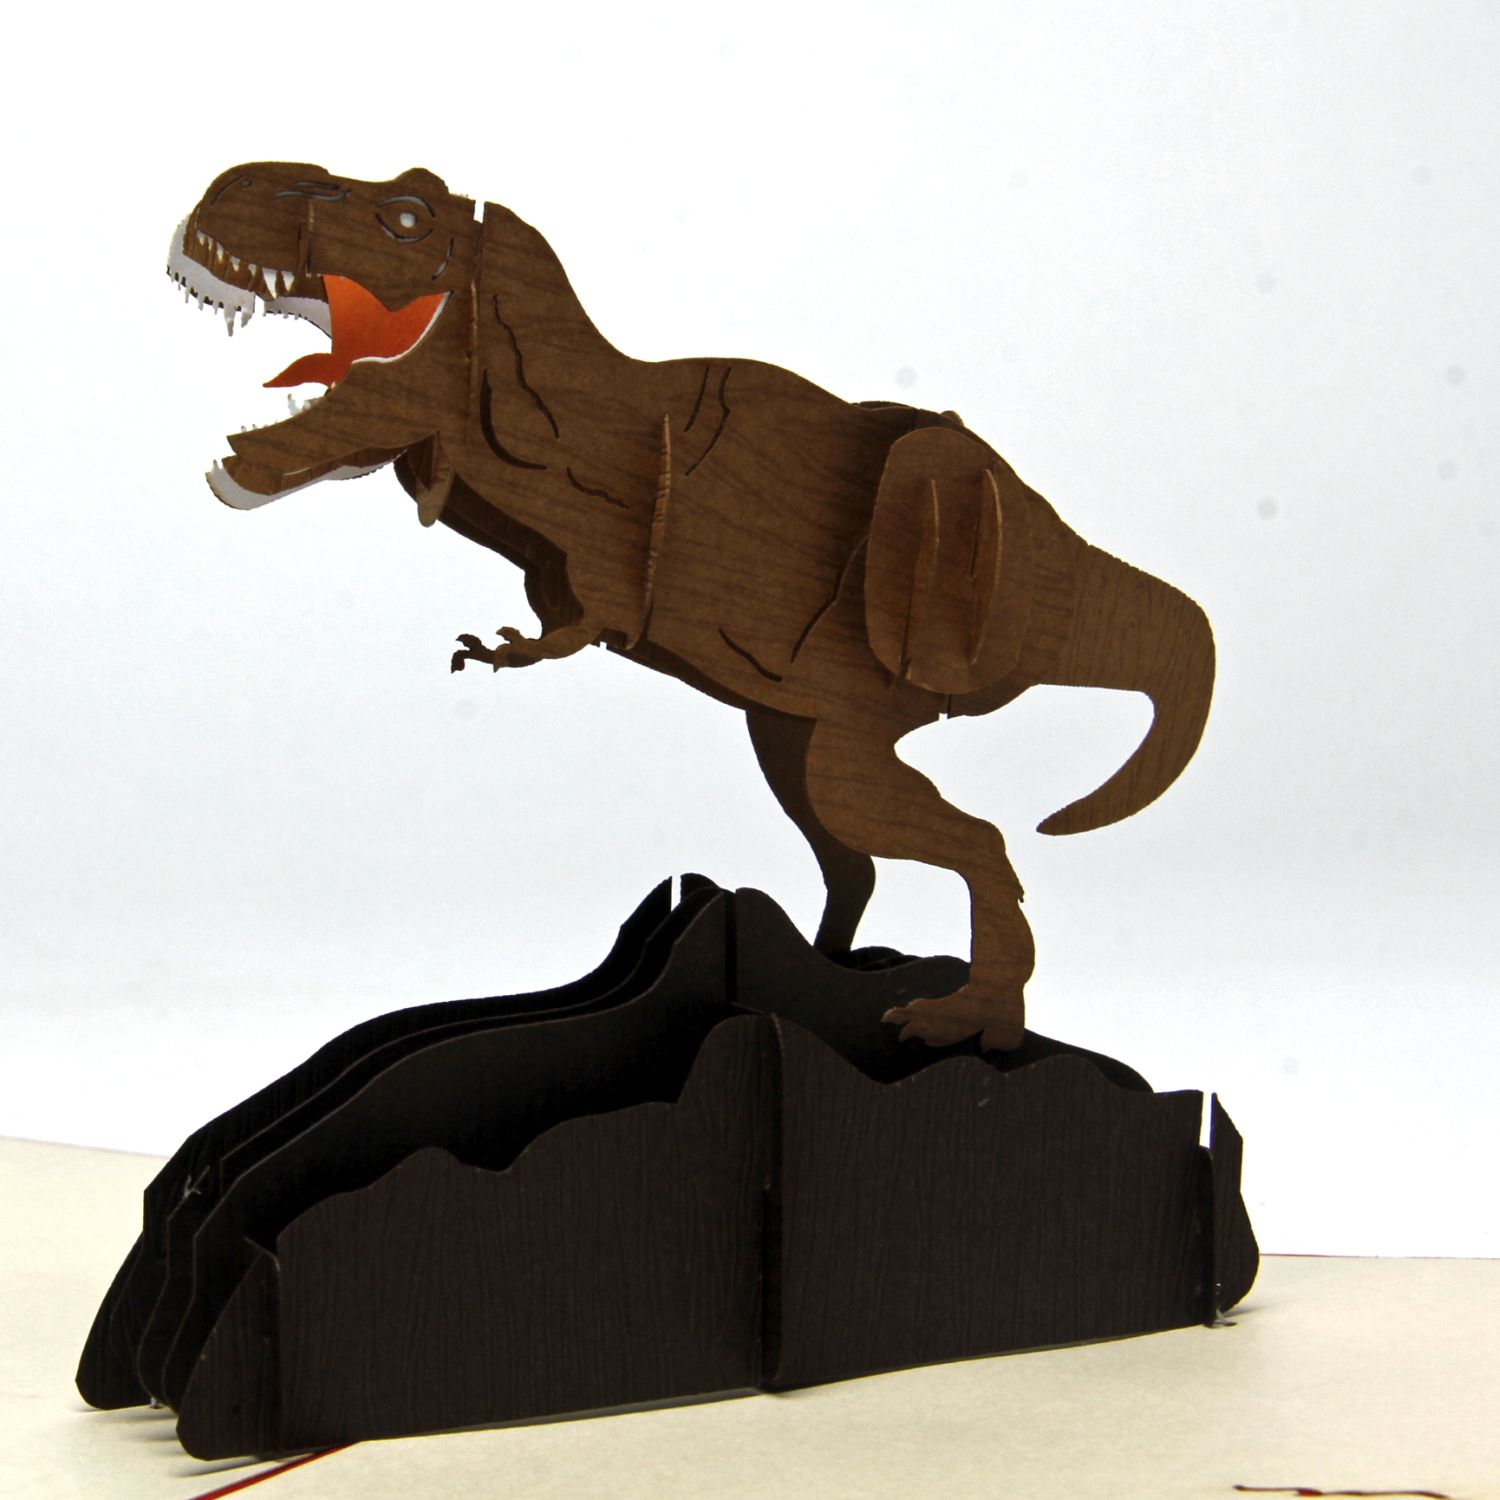 Roses without Thorns: Dinosaur Product Image 2 of 4